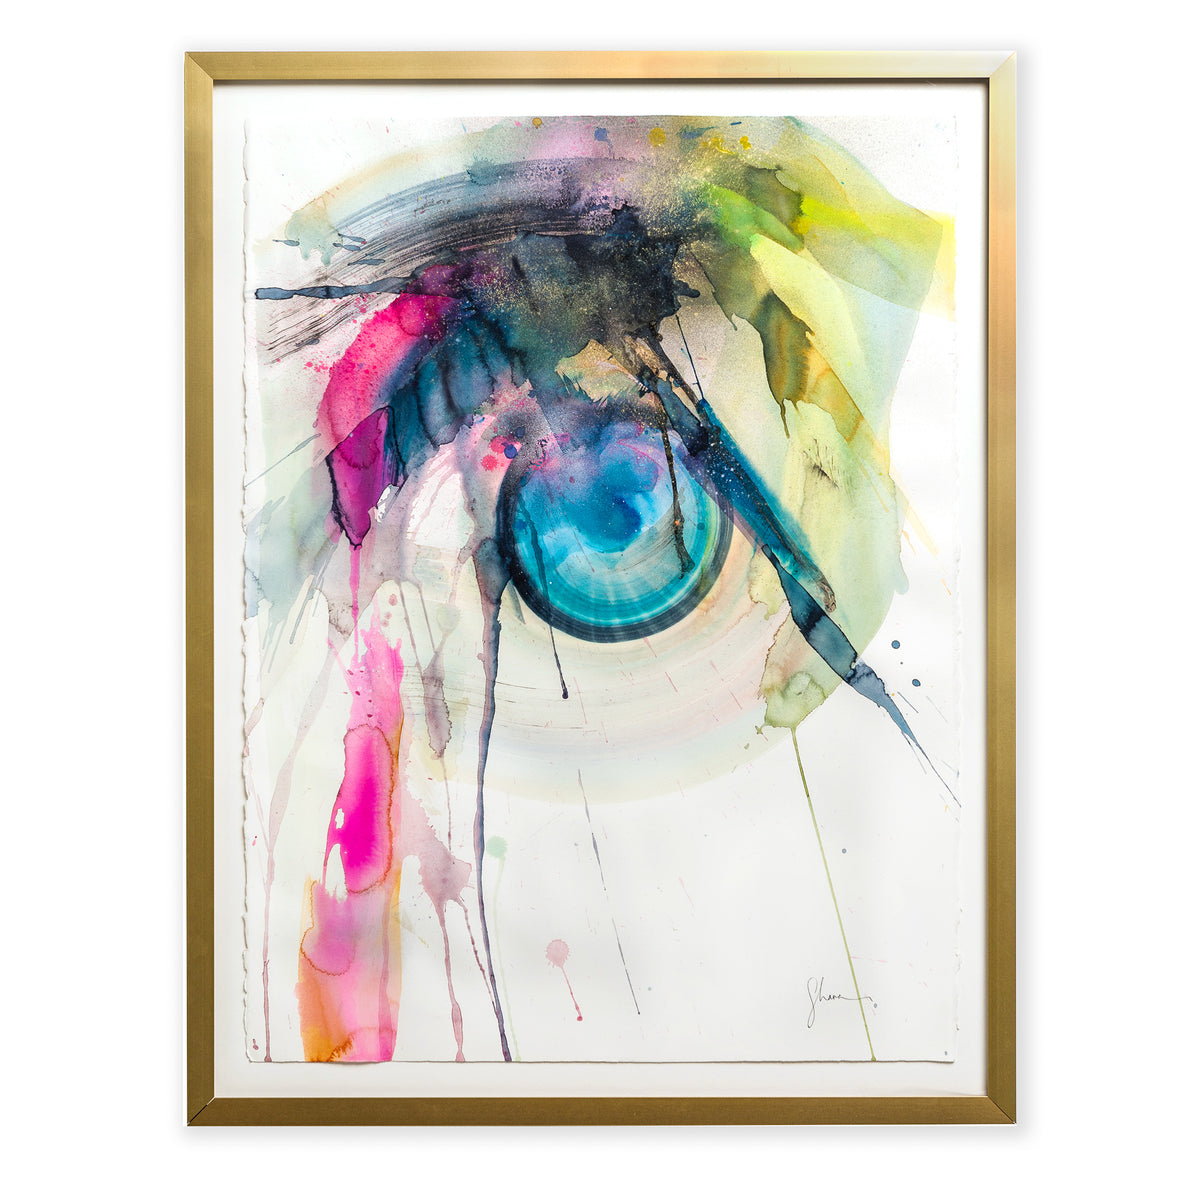 An original abstracting painting illustrating a circle covered by brush strokes of various bold hues painted with watercolor on a soft white background